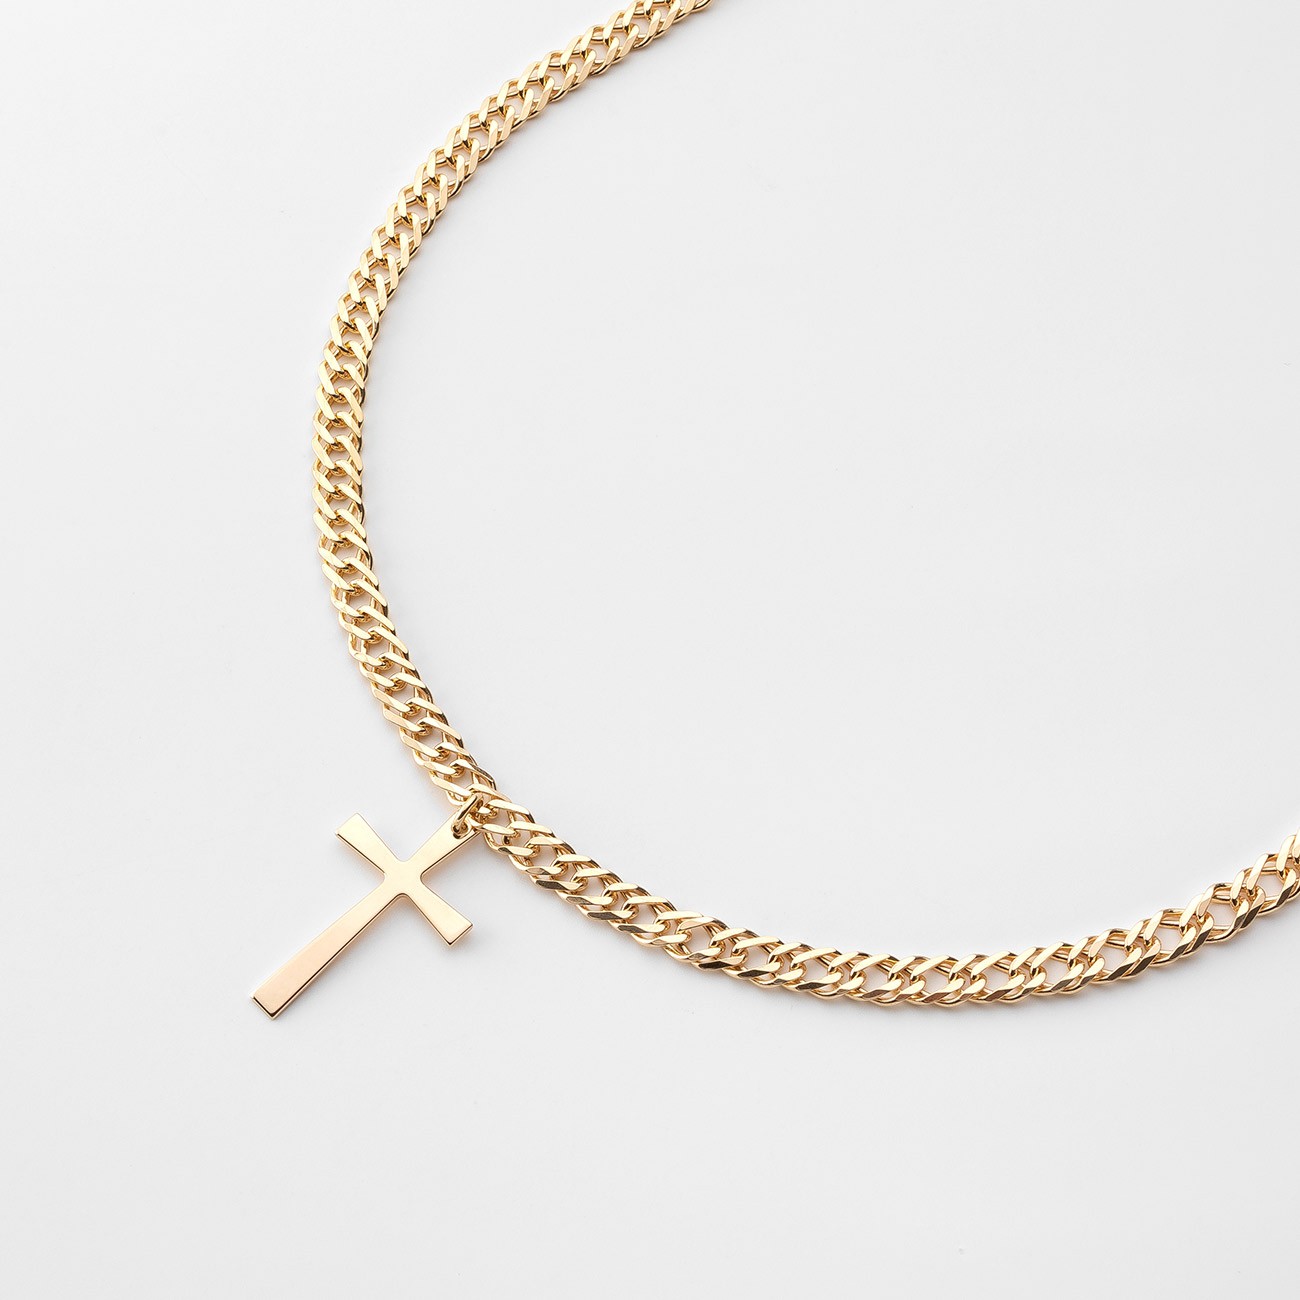 Cross pendant on a curb chain